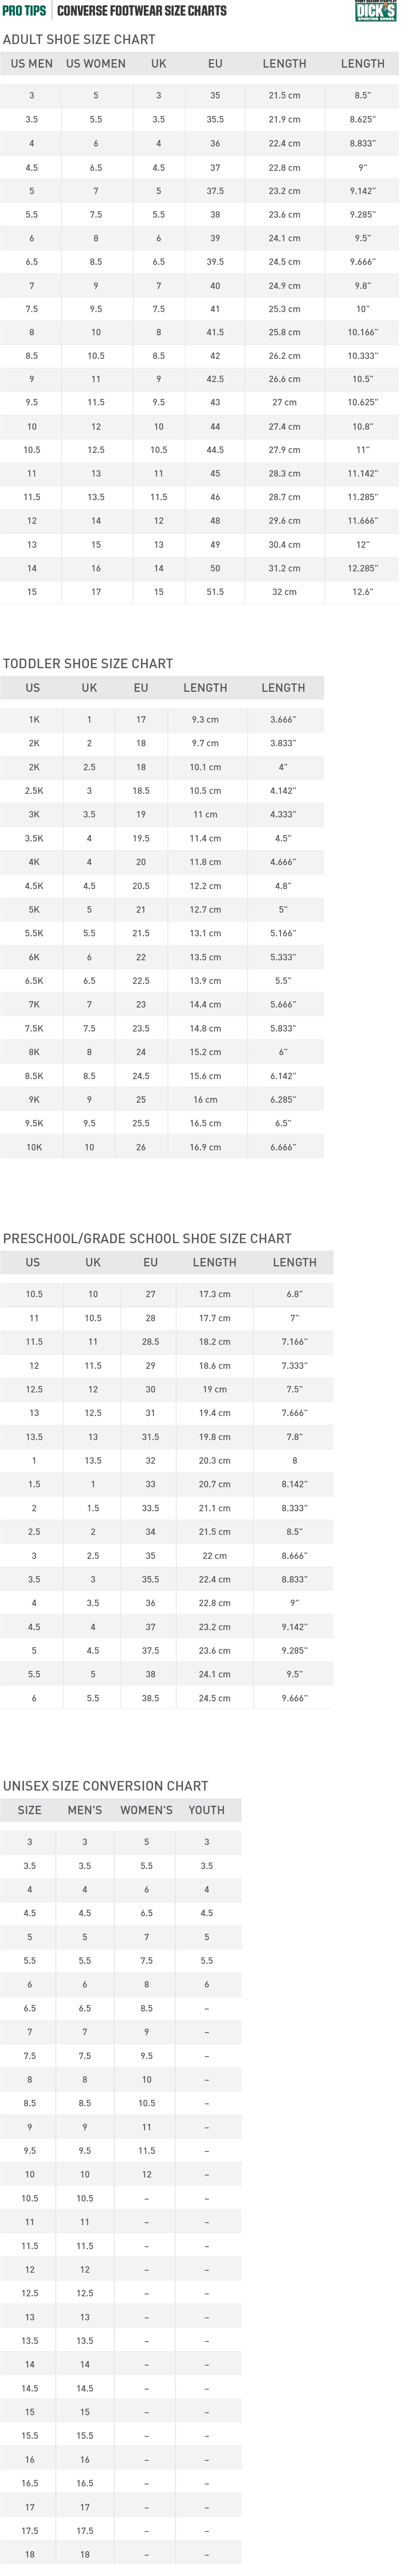 Converse® Footwear Size Charts | PRO TIPS by Sporting Goods